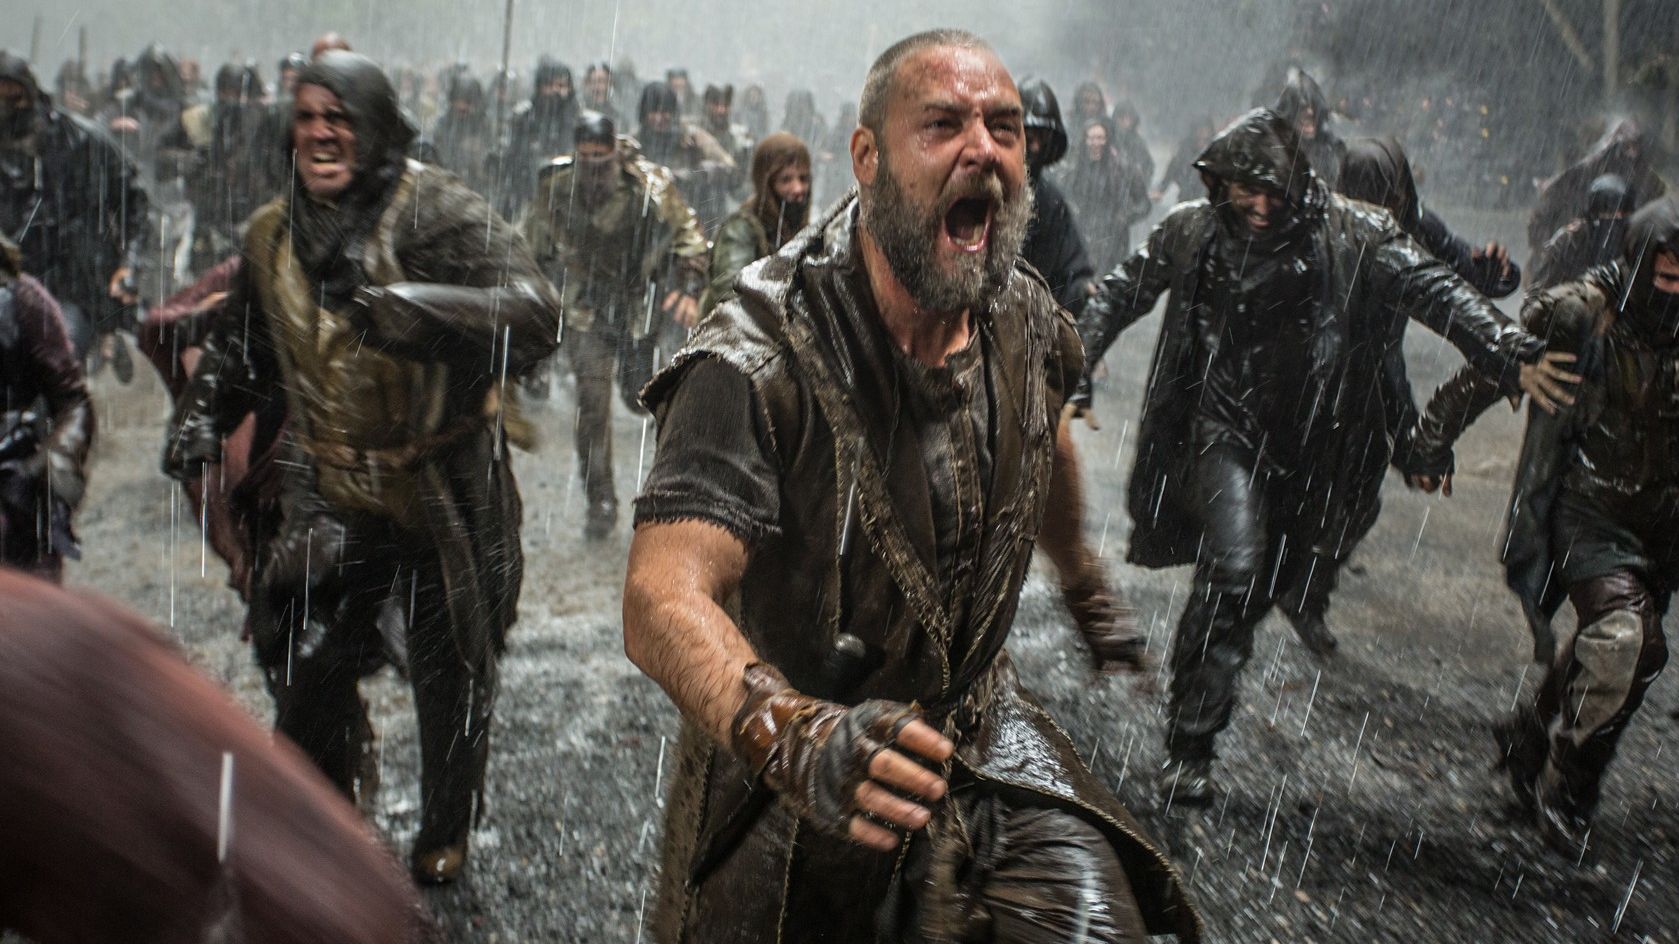 Carol Costello says a new film about Noah takes artistic liberties with the story. Is that so wrong?